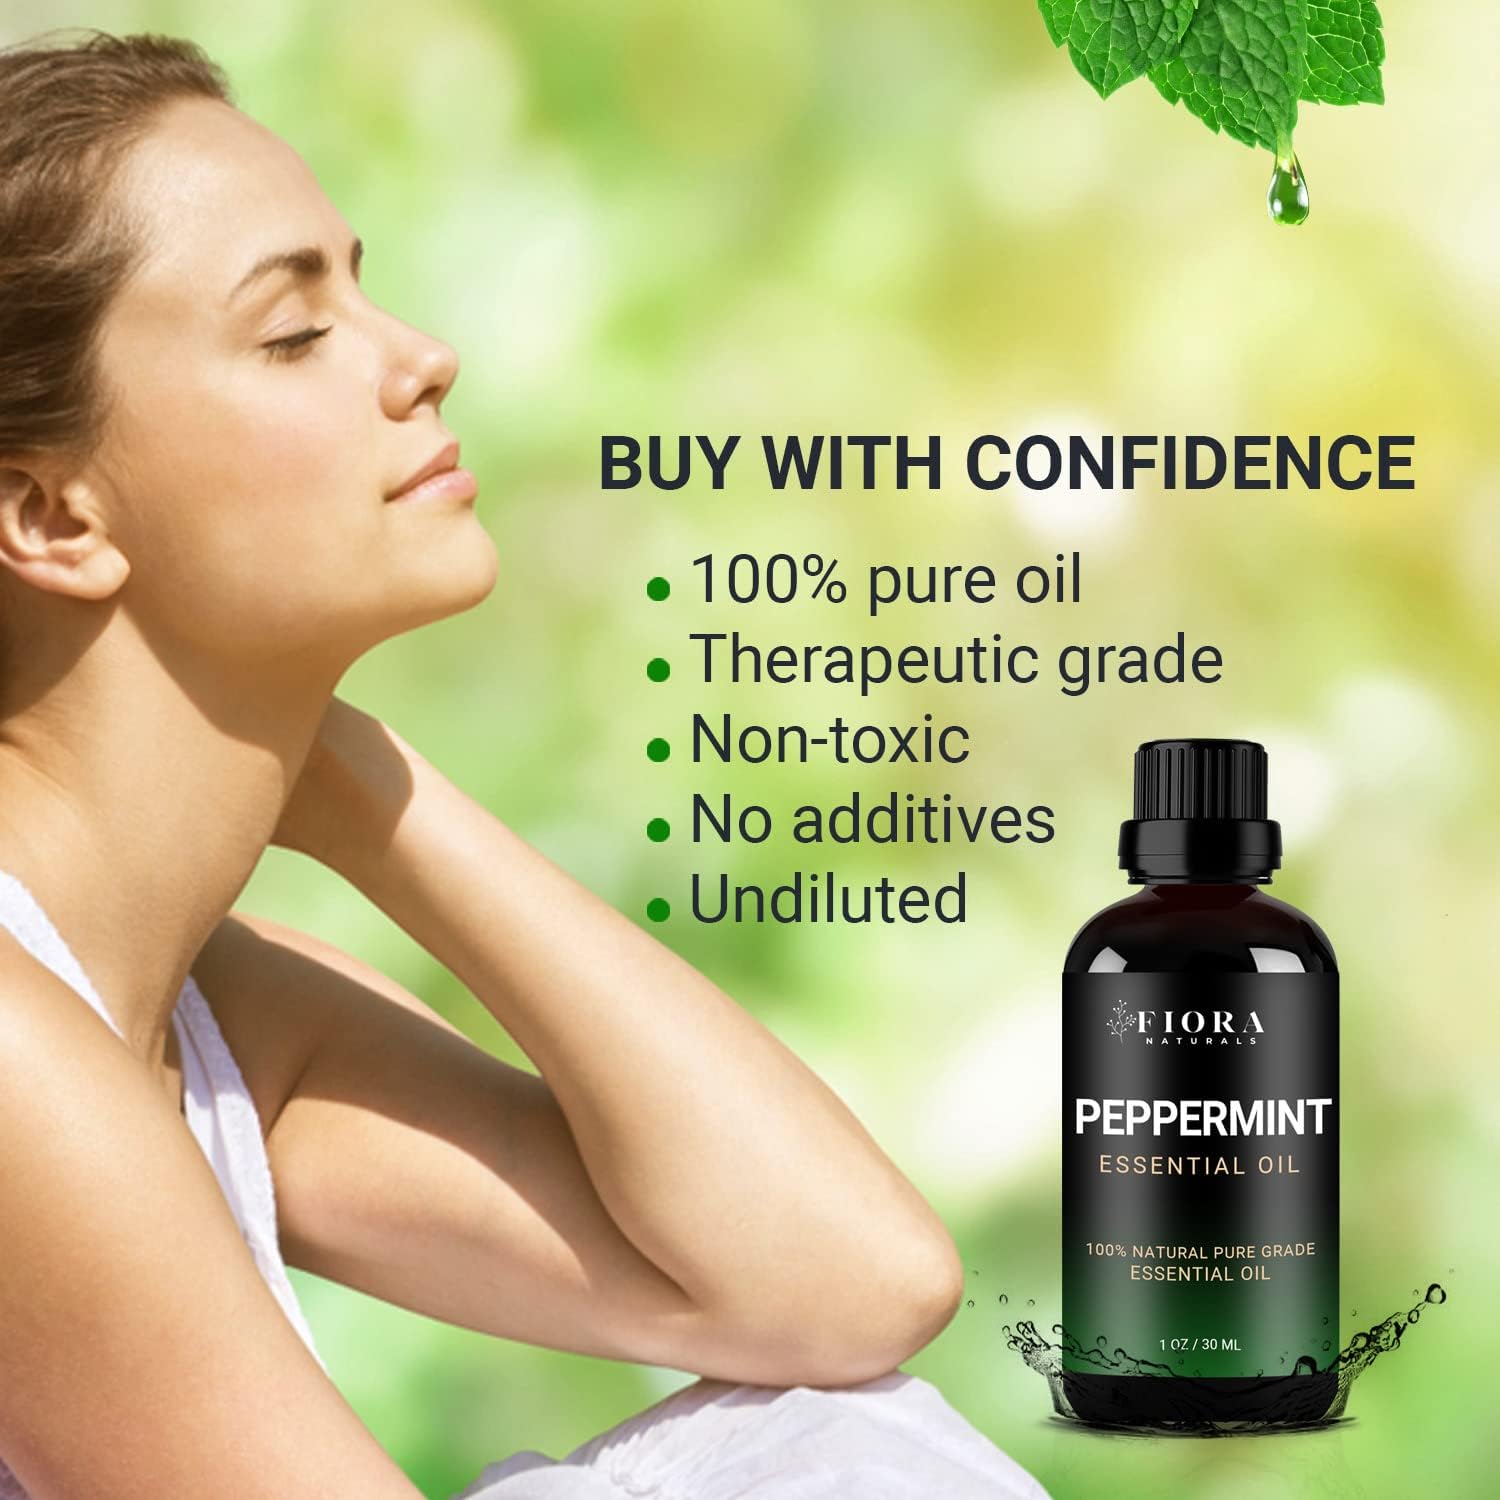 Peppermint Essential Oil - Skin, Hair, Scalp, Diffuser, Aromatherapy 